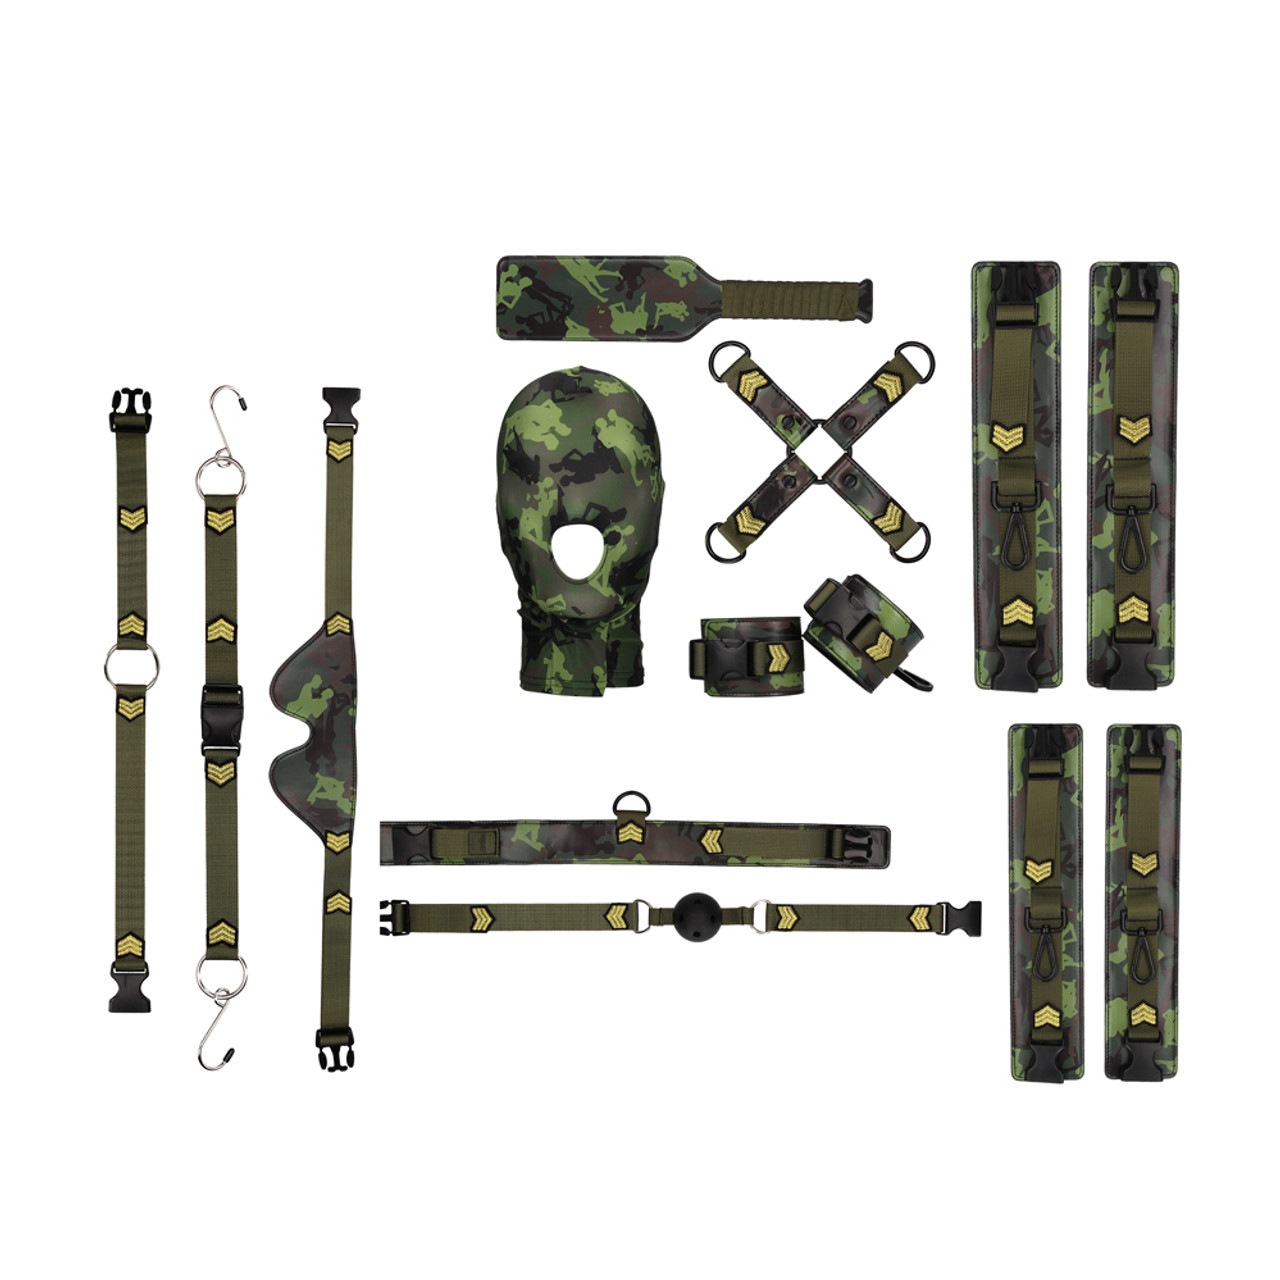 Buy the Ouch Complete Army Bondage Kit in Camo Green - Shots Toys Media